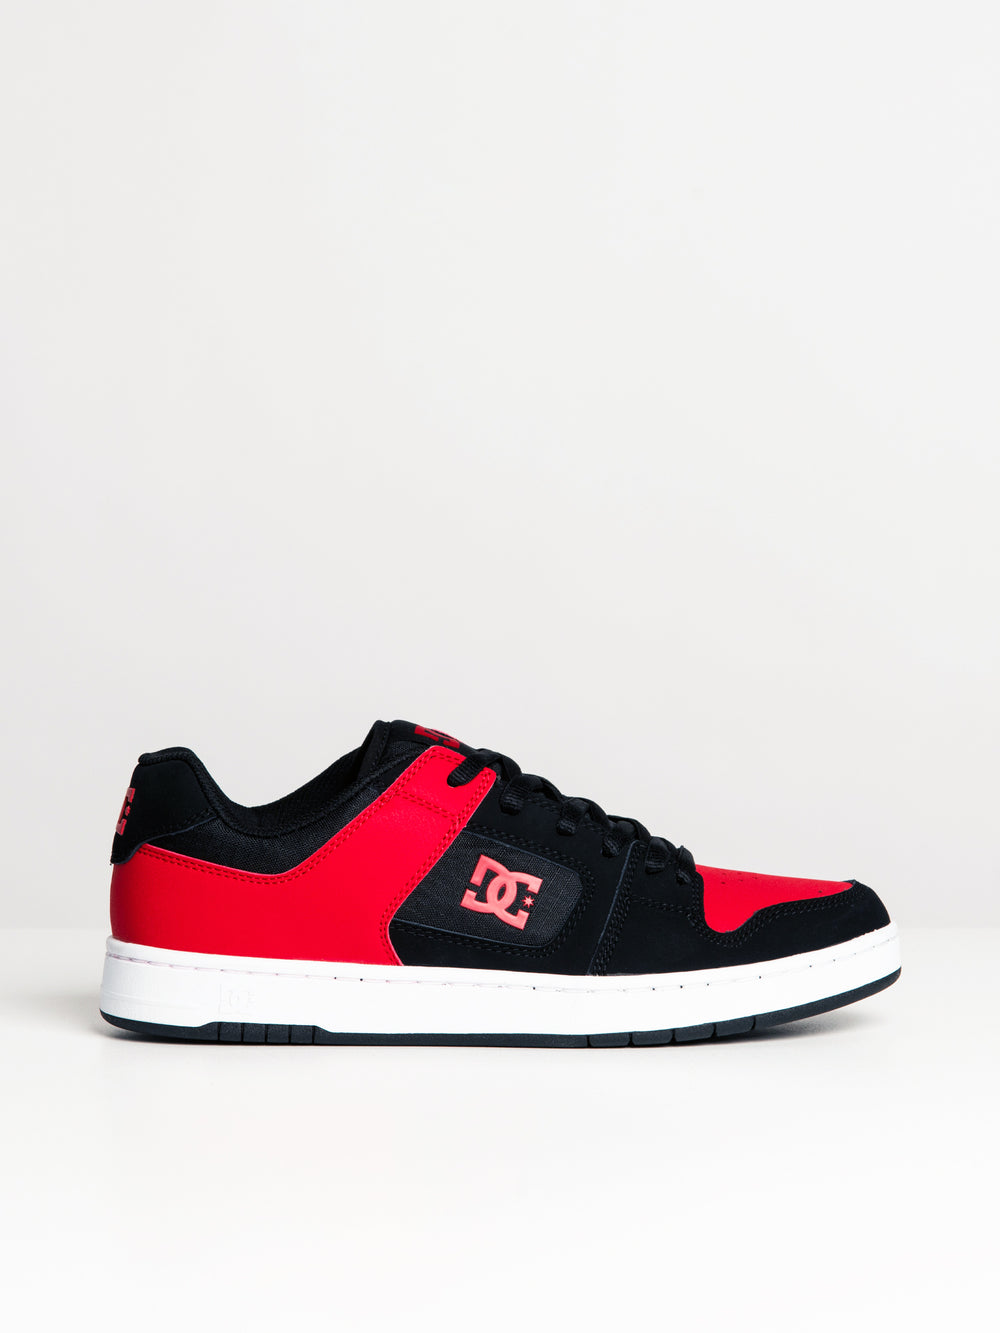 MENS DC SHOES MANTECA 4 SNEAKER - CLEARANCE